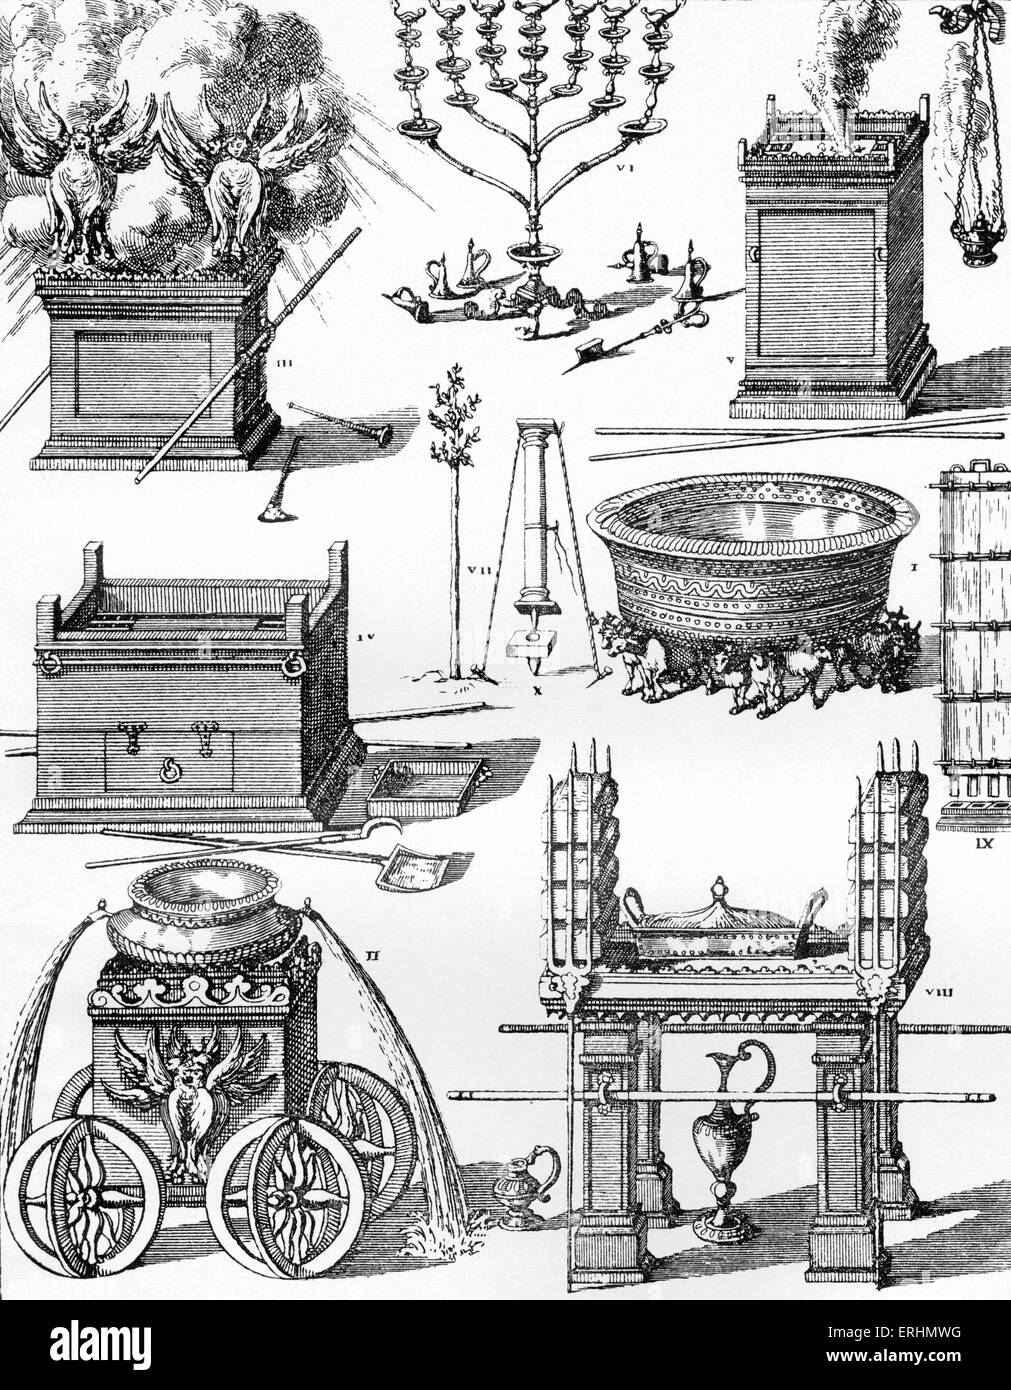 Containers, incense containers, seven branched candlestick thought to be used in Temple times. From book published in Utrecht, Stock Photo